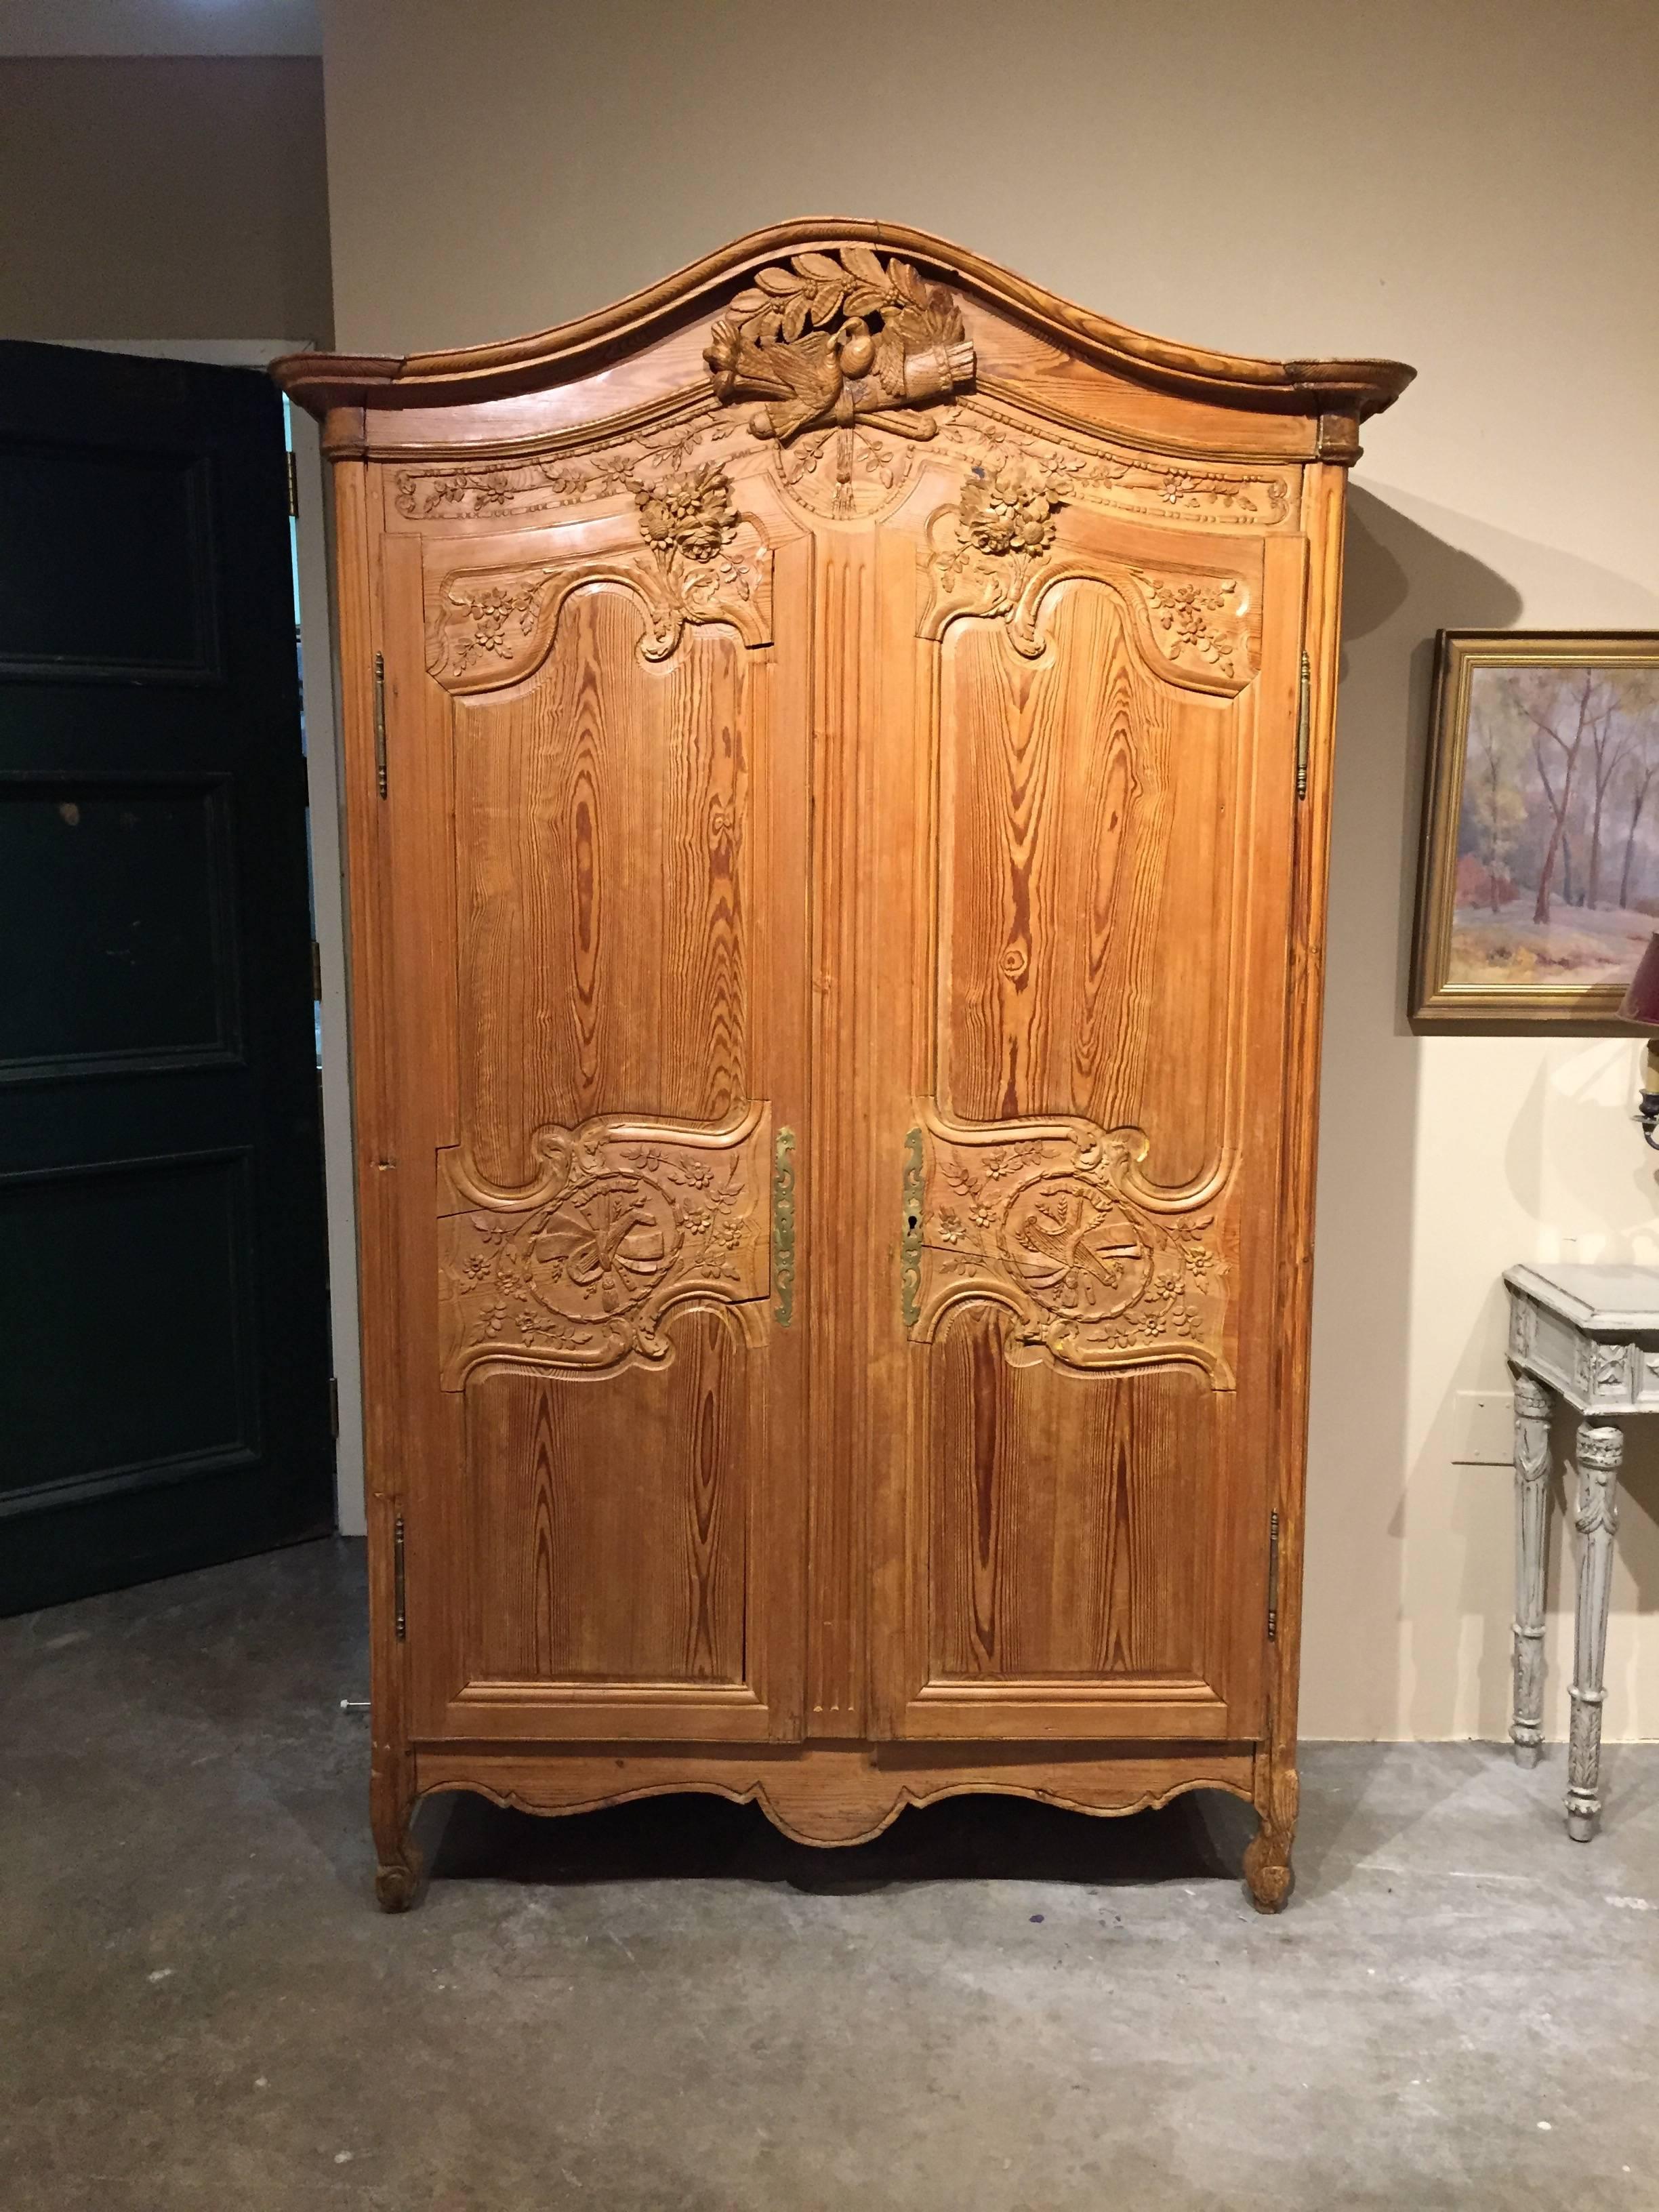 French marriage armoire with excellent detail in carved pine. Retains one shelf and original key.